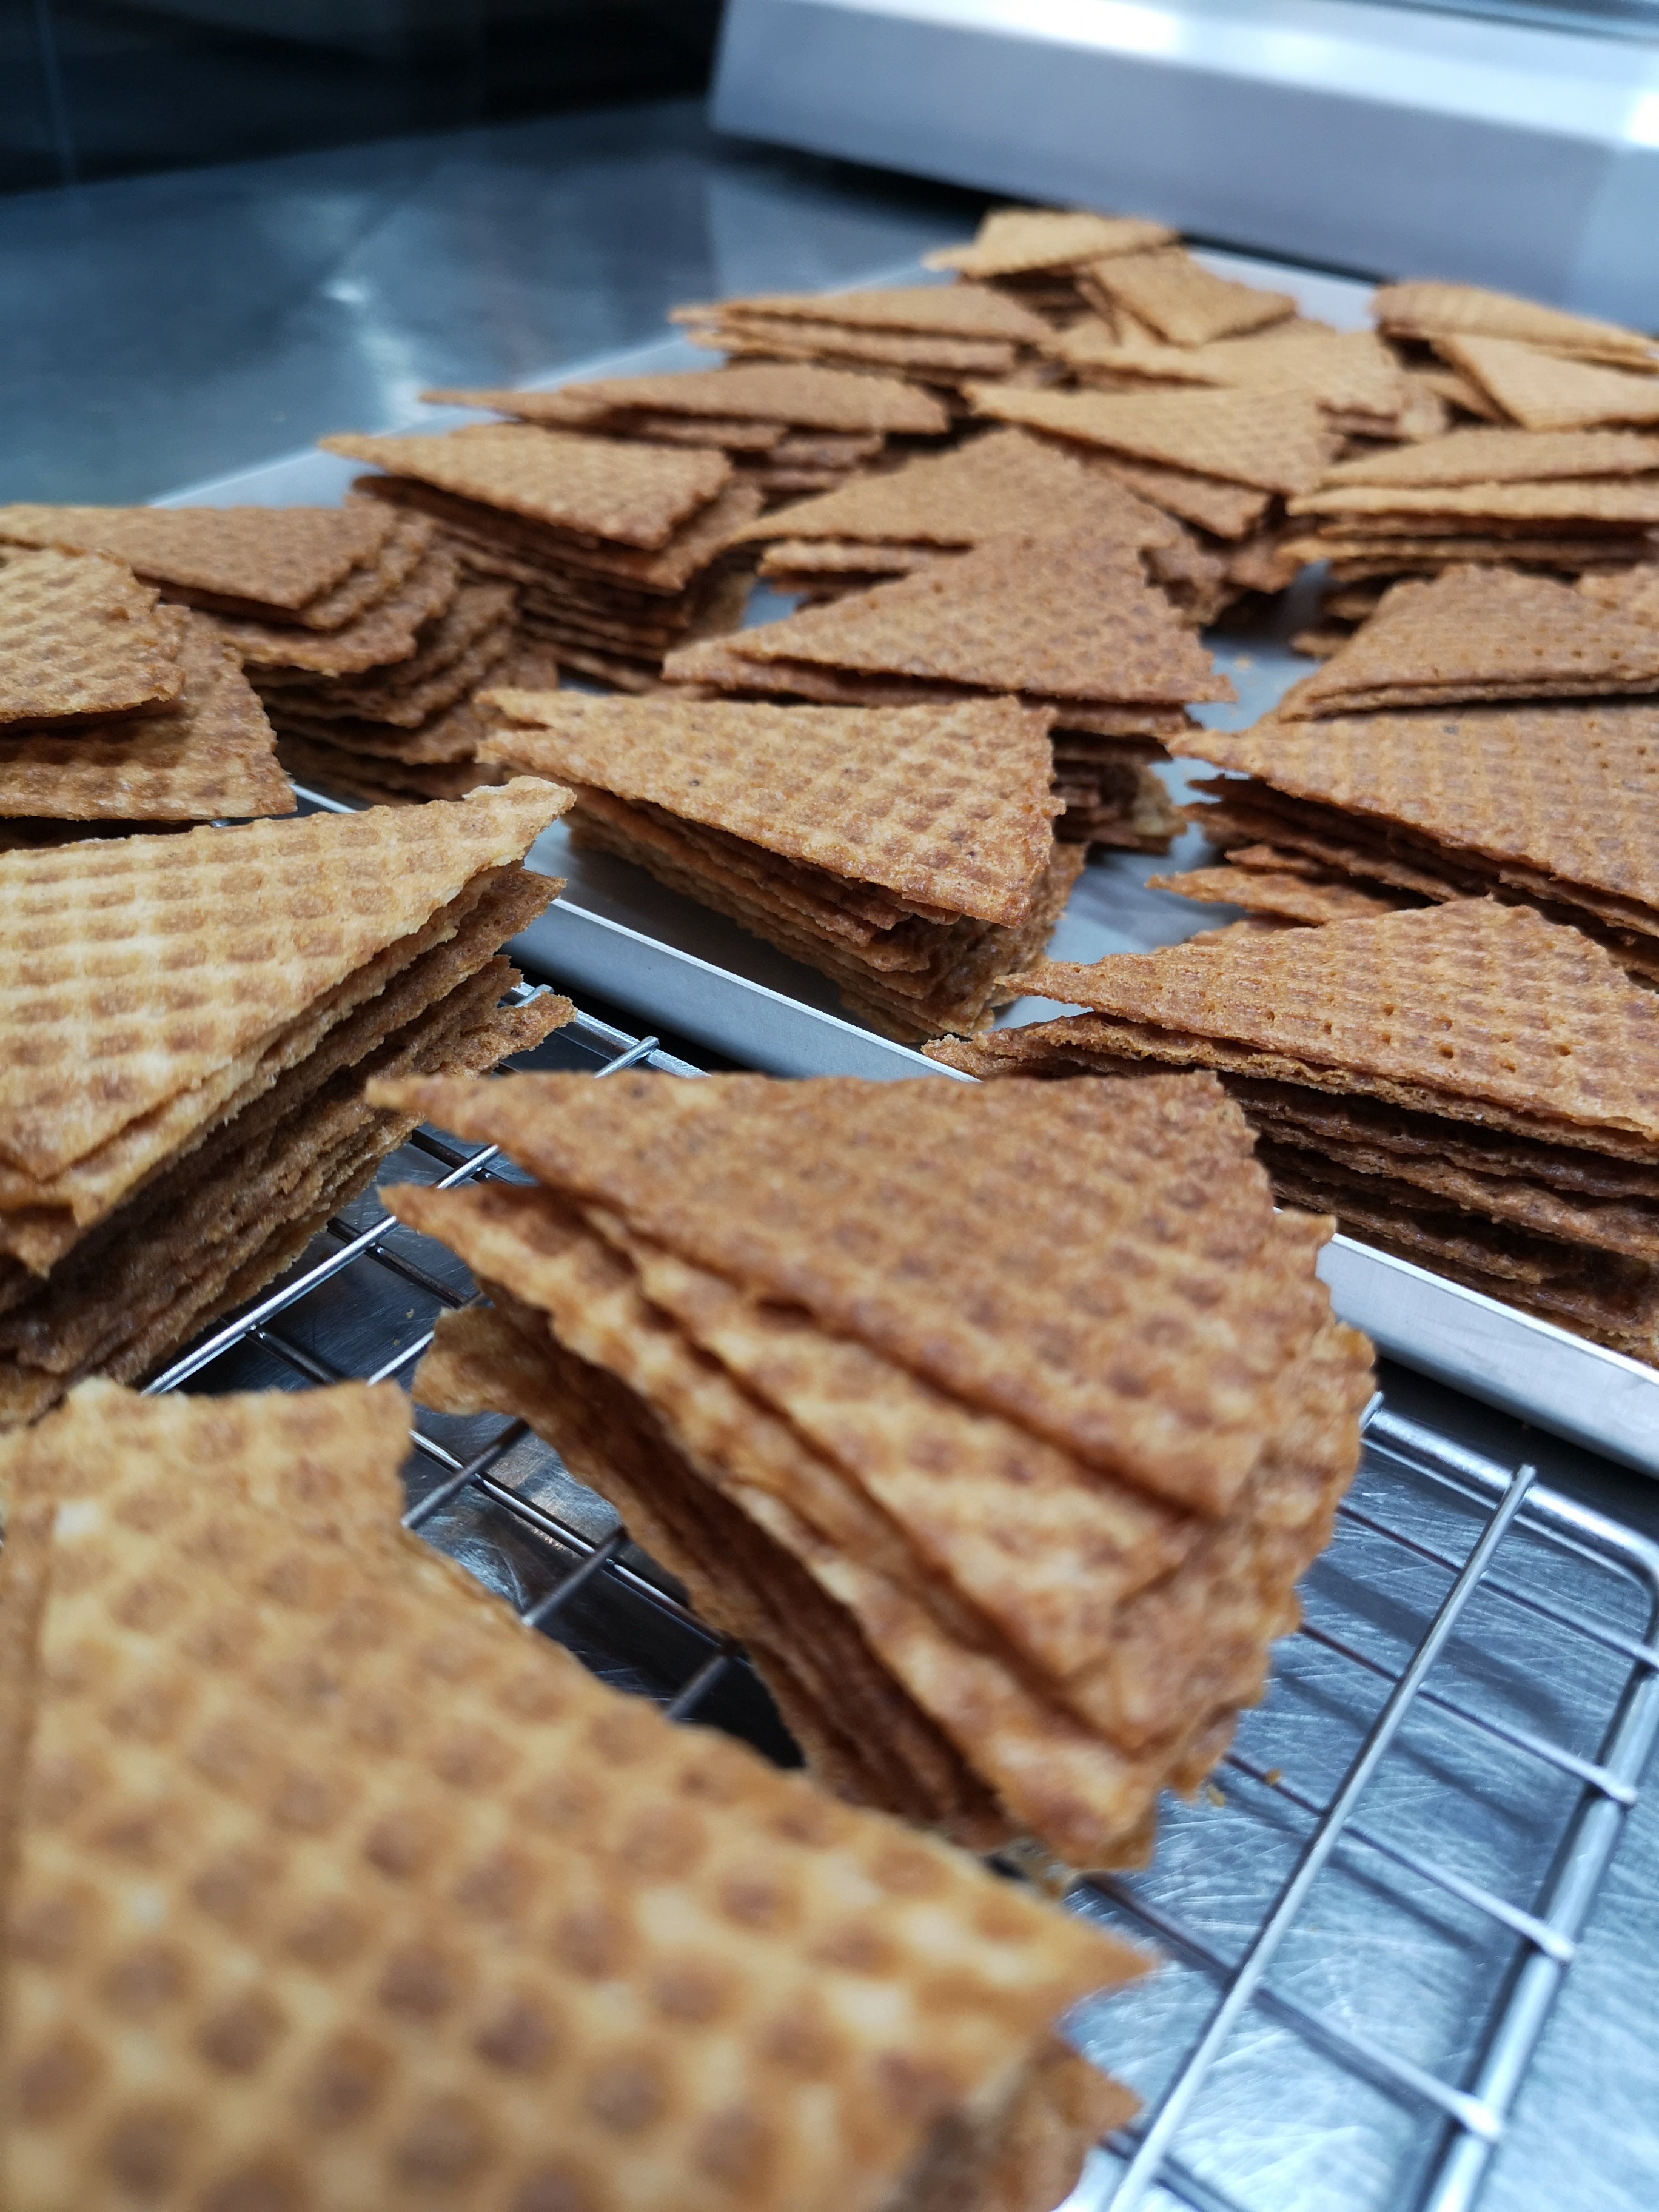 Wafer Biscuits (hand-made)